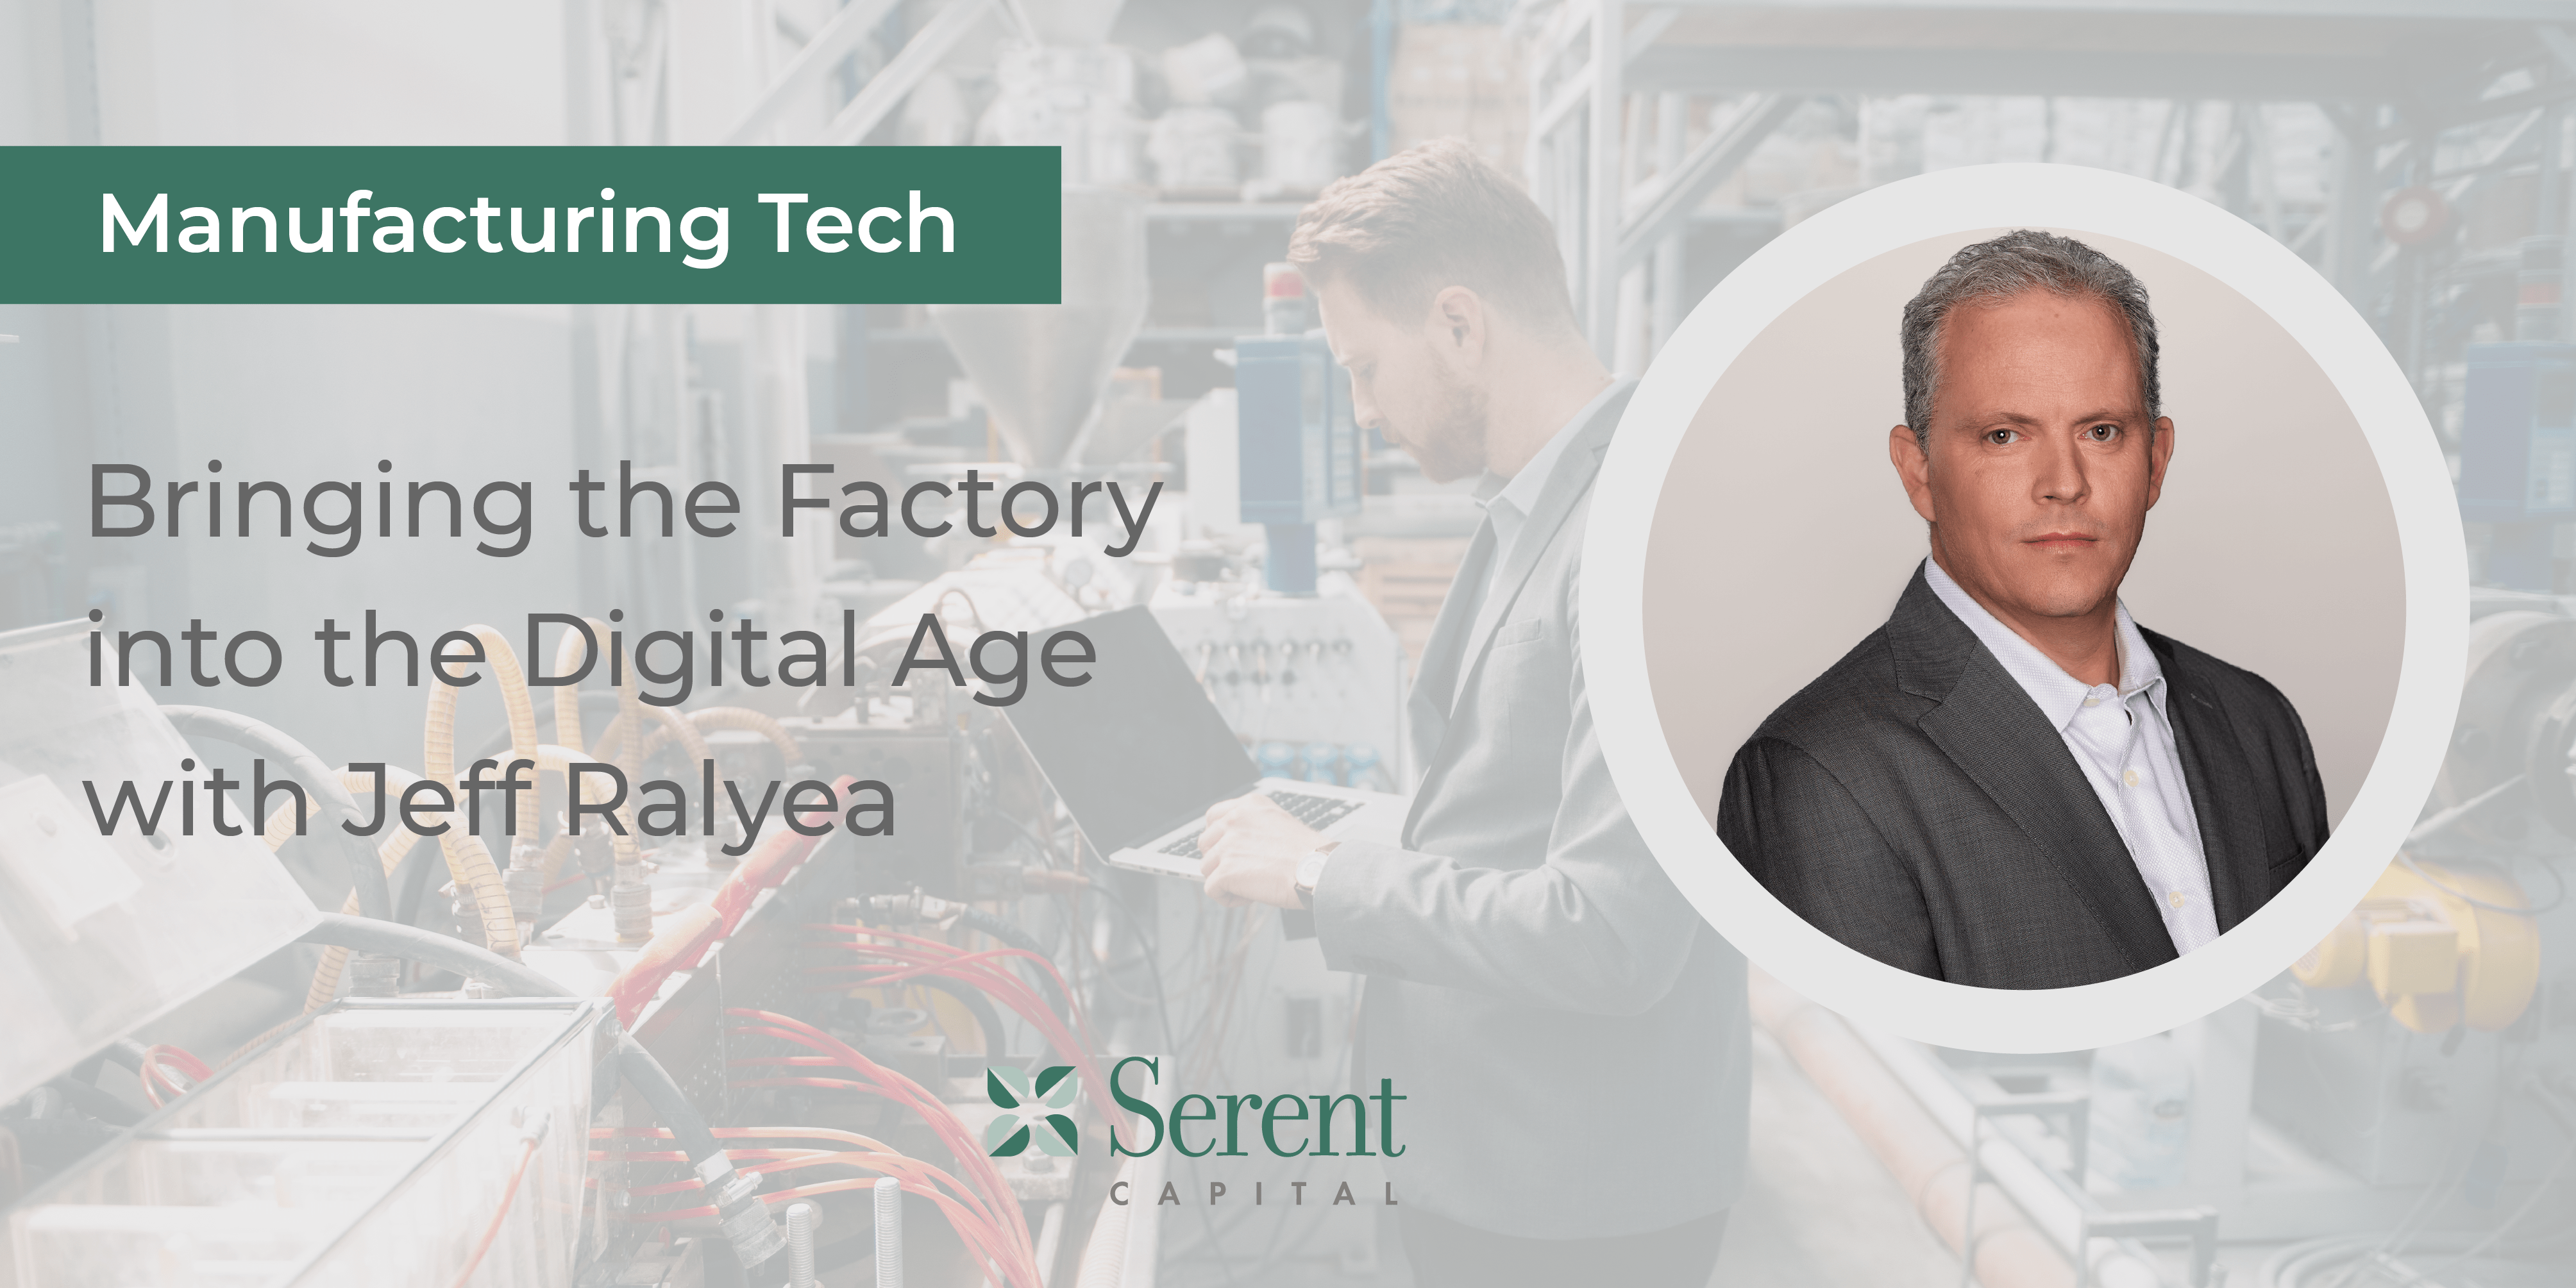 Manufacturing Tech Whitepaper: Bringing the Factory to the Digital Age with Jeff Ralyea